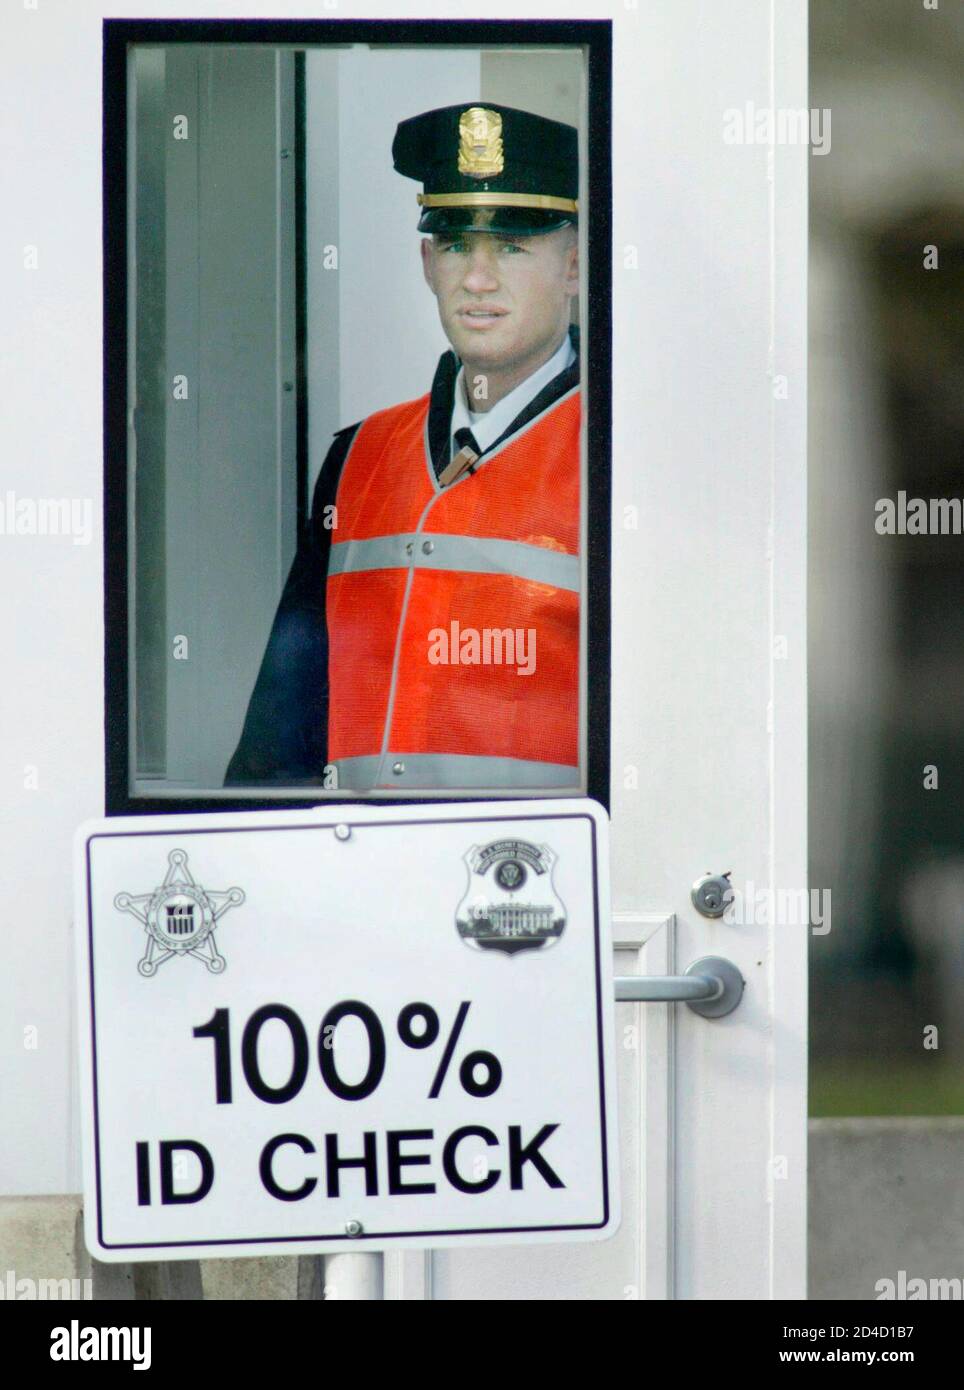 A U.S. Secret Service Uniformed Division Officer stands watch at a checkpoint on the perimeter of the White House compound in Washington, March 19, 2003. Security levels have been elevated in the Nation's Capital after U.S. President George W. Bush announced March 17 that Iraqi President Saddam Hussein and his sons have 48 hours to leave Iraq, and if they do not the U.S. will commence a military assault on his regime. REUTERS/Larry Downing  LSD/HB Stock Photo